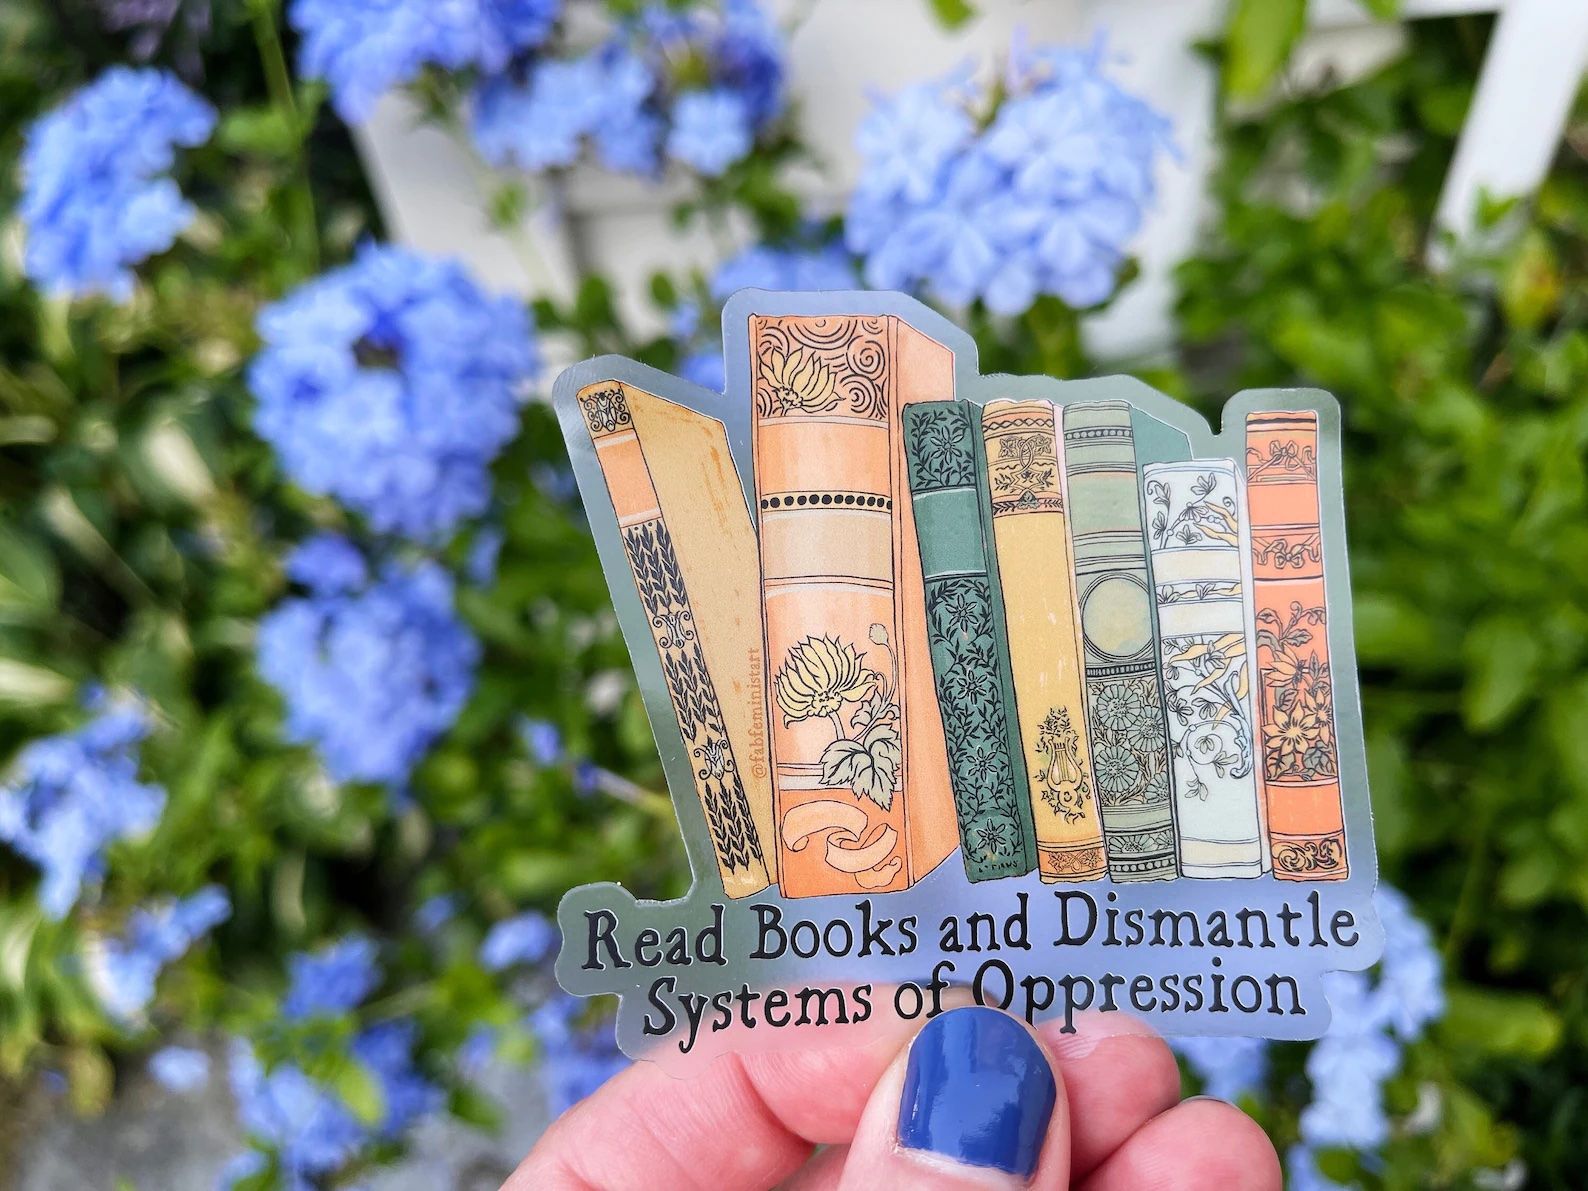 A clear sticker that depicts beautiful antique book spines and reads "Read Books and Dismantle Systems of Oppression"